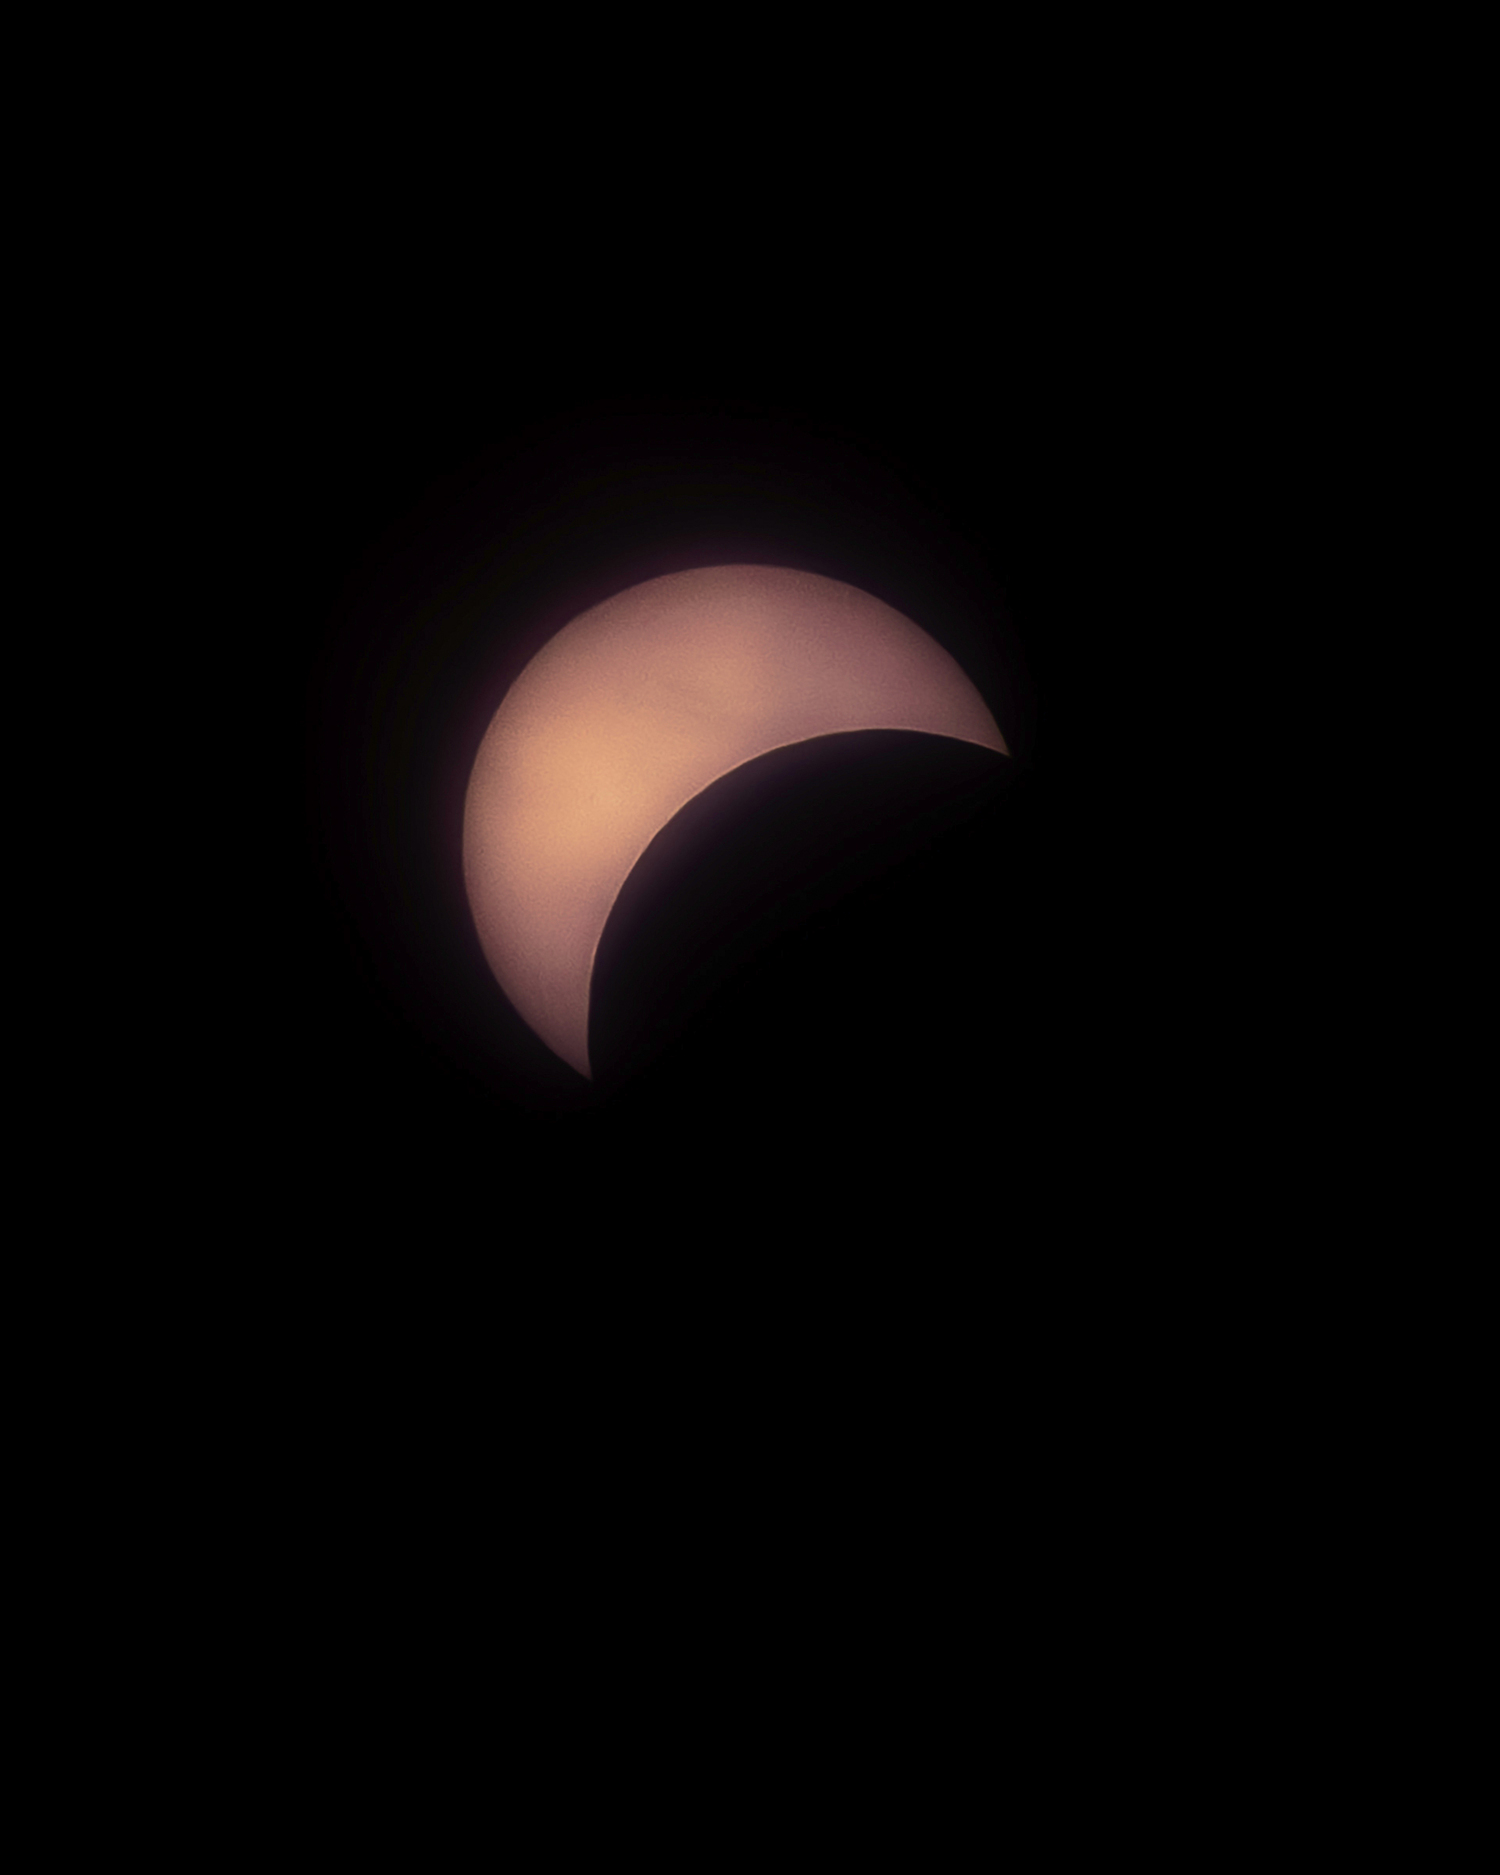 The moon partially covers the sun during Monday's eclipse.